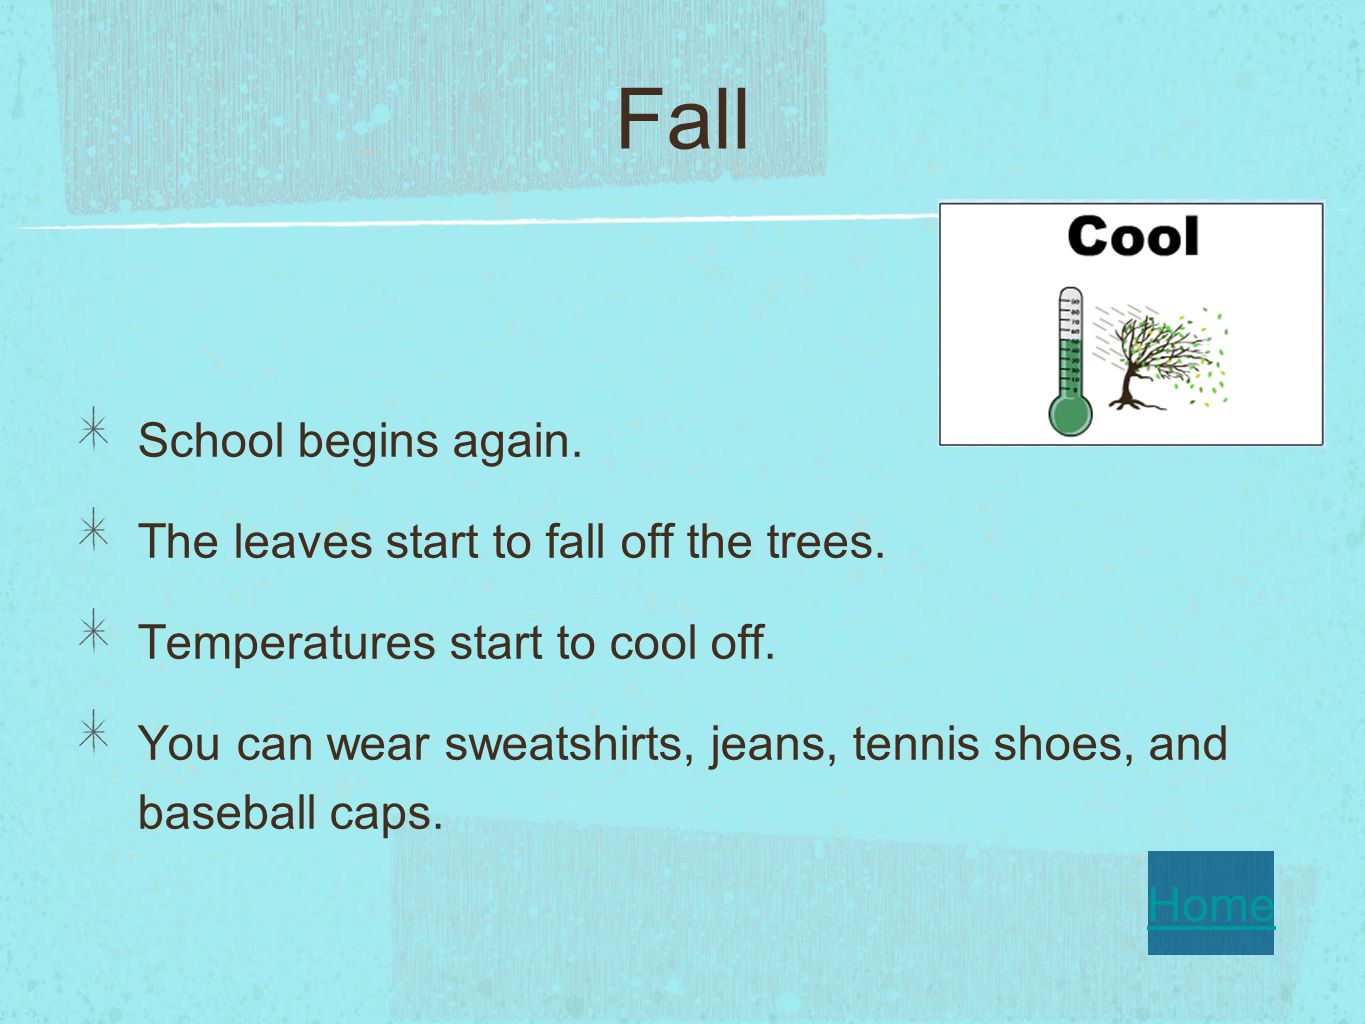 Fall School begins again. The leaves start to fall off the trees.